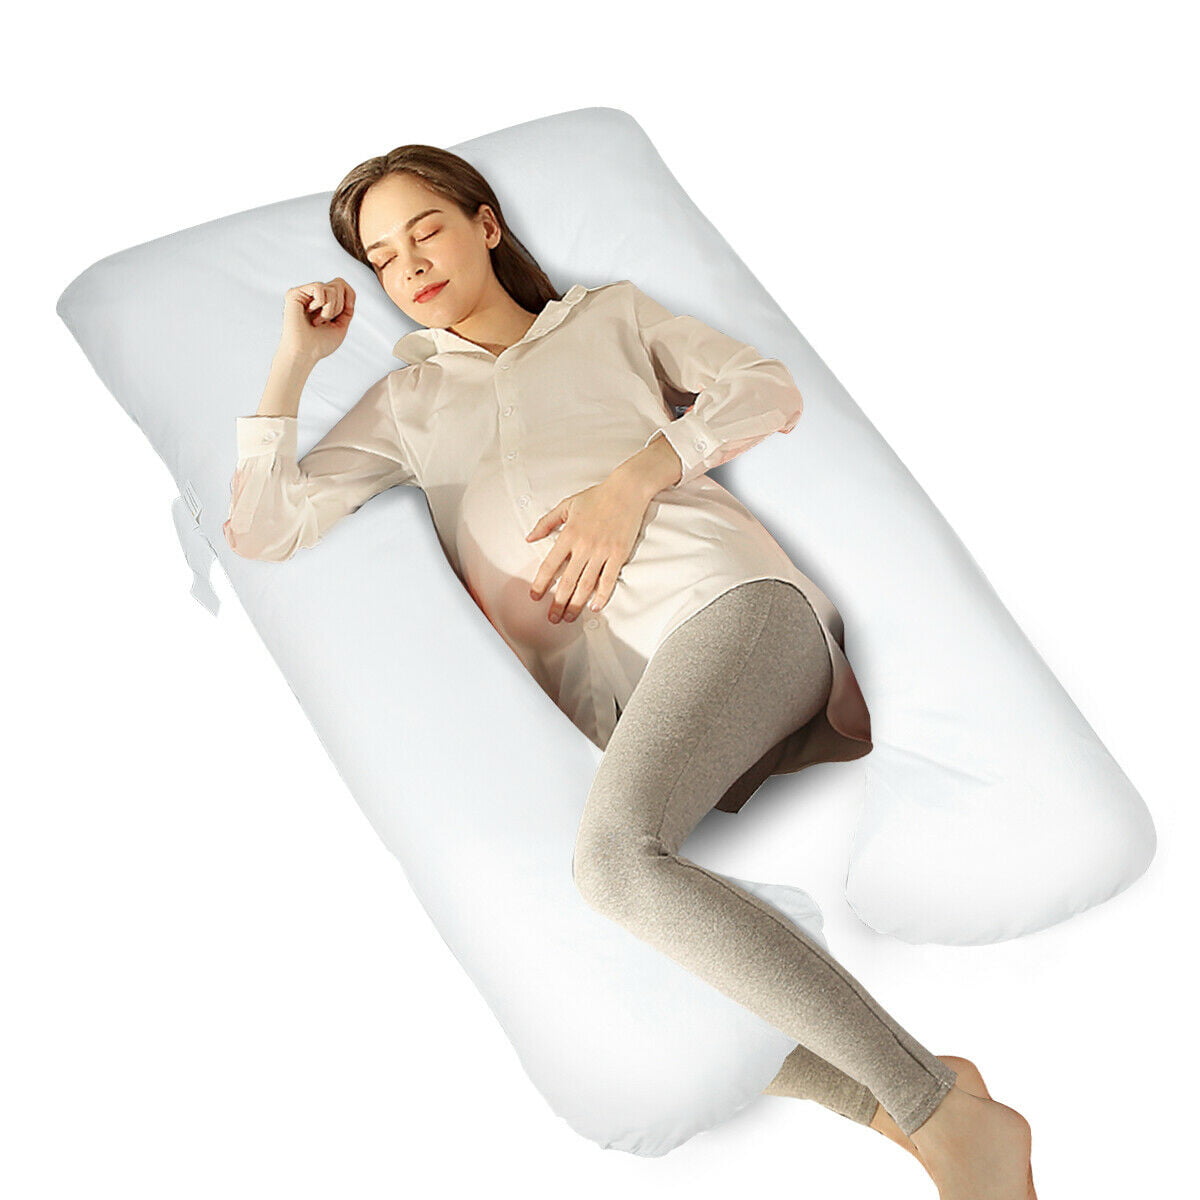 Oversized U-Shape Pregnancy Pillow Full Body Support Maternity Pillow or Cover 